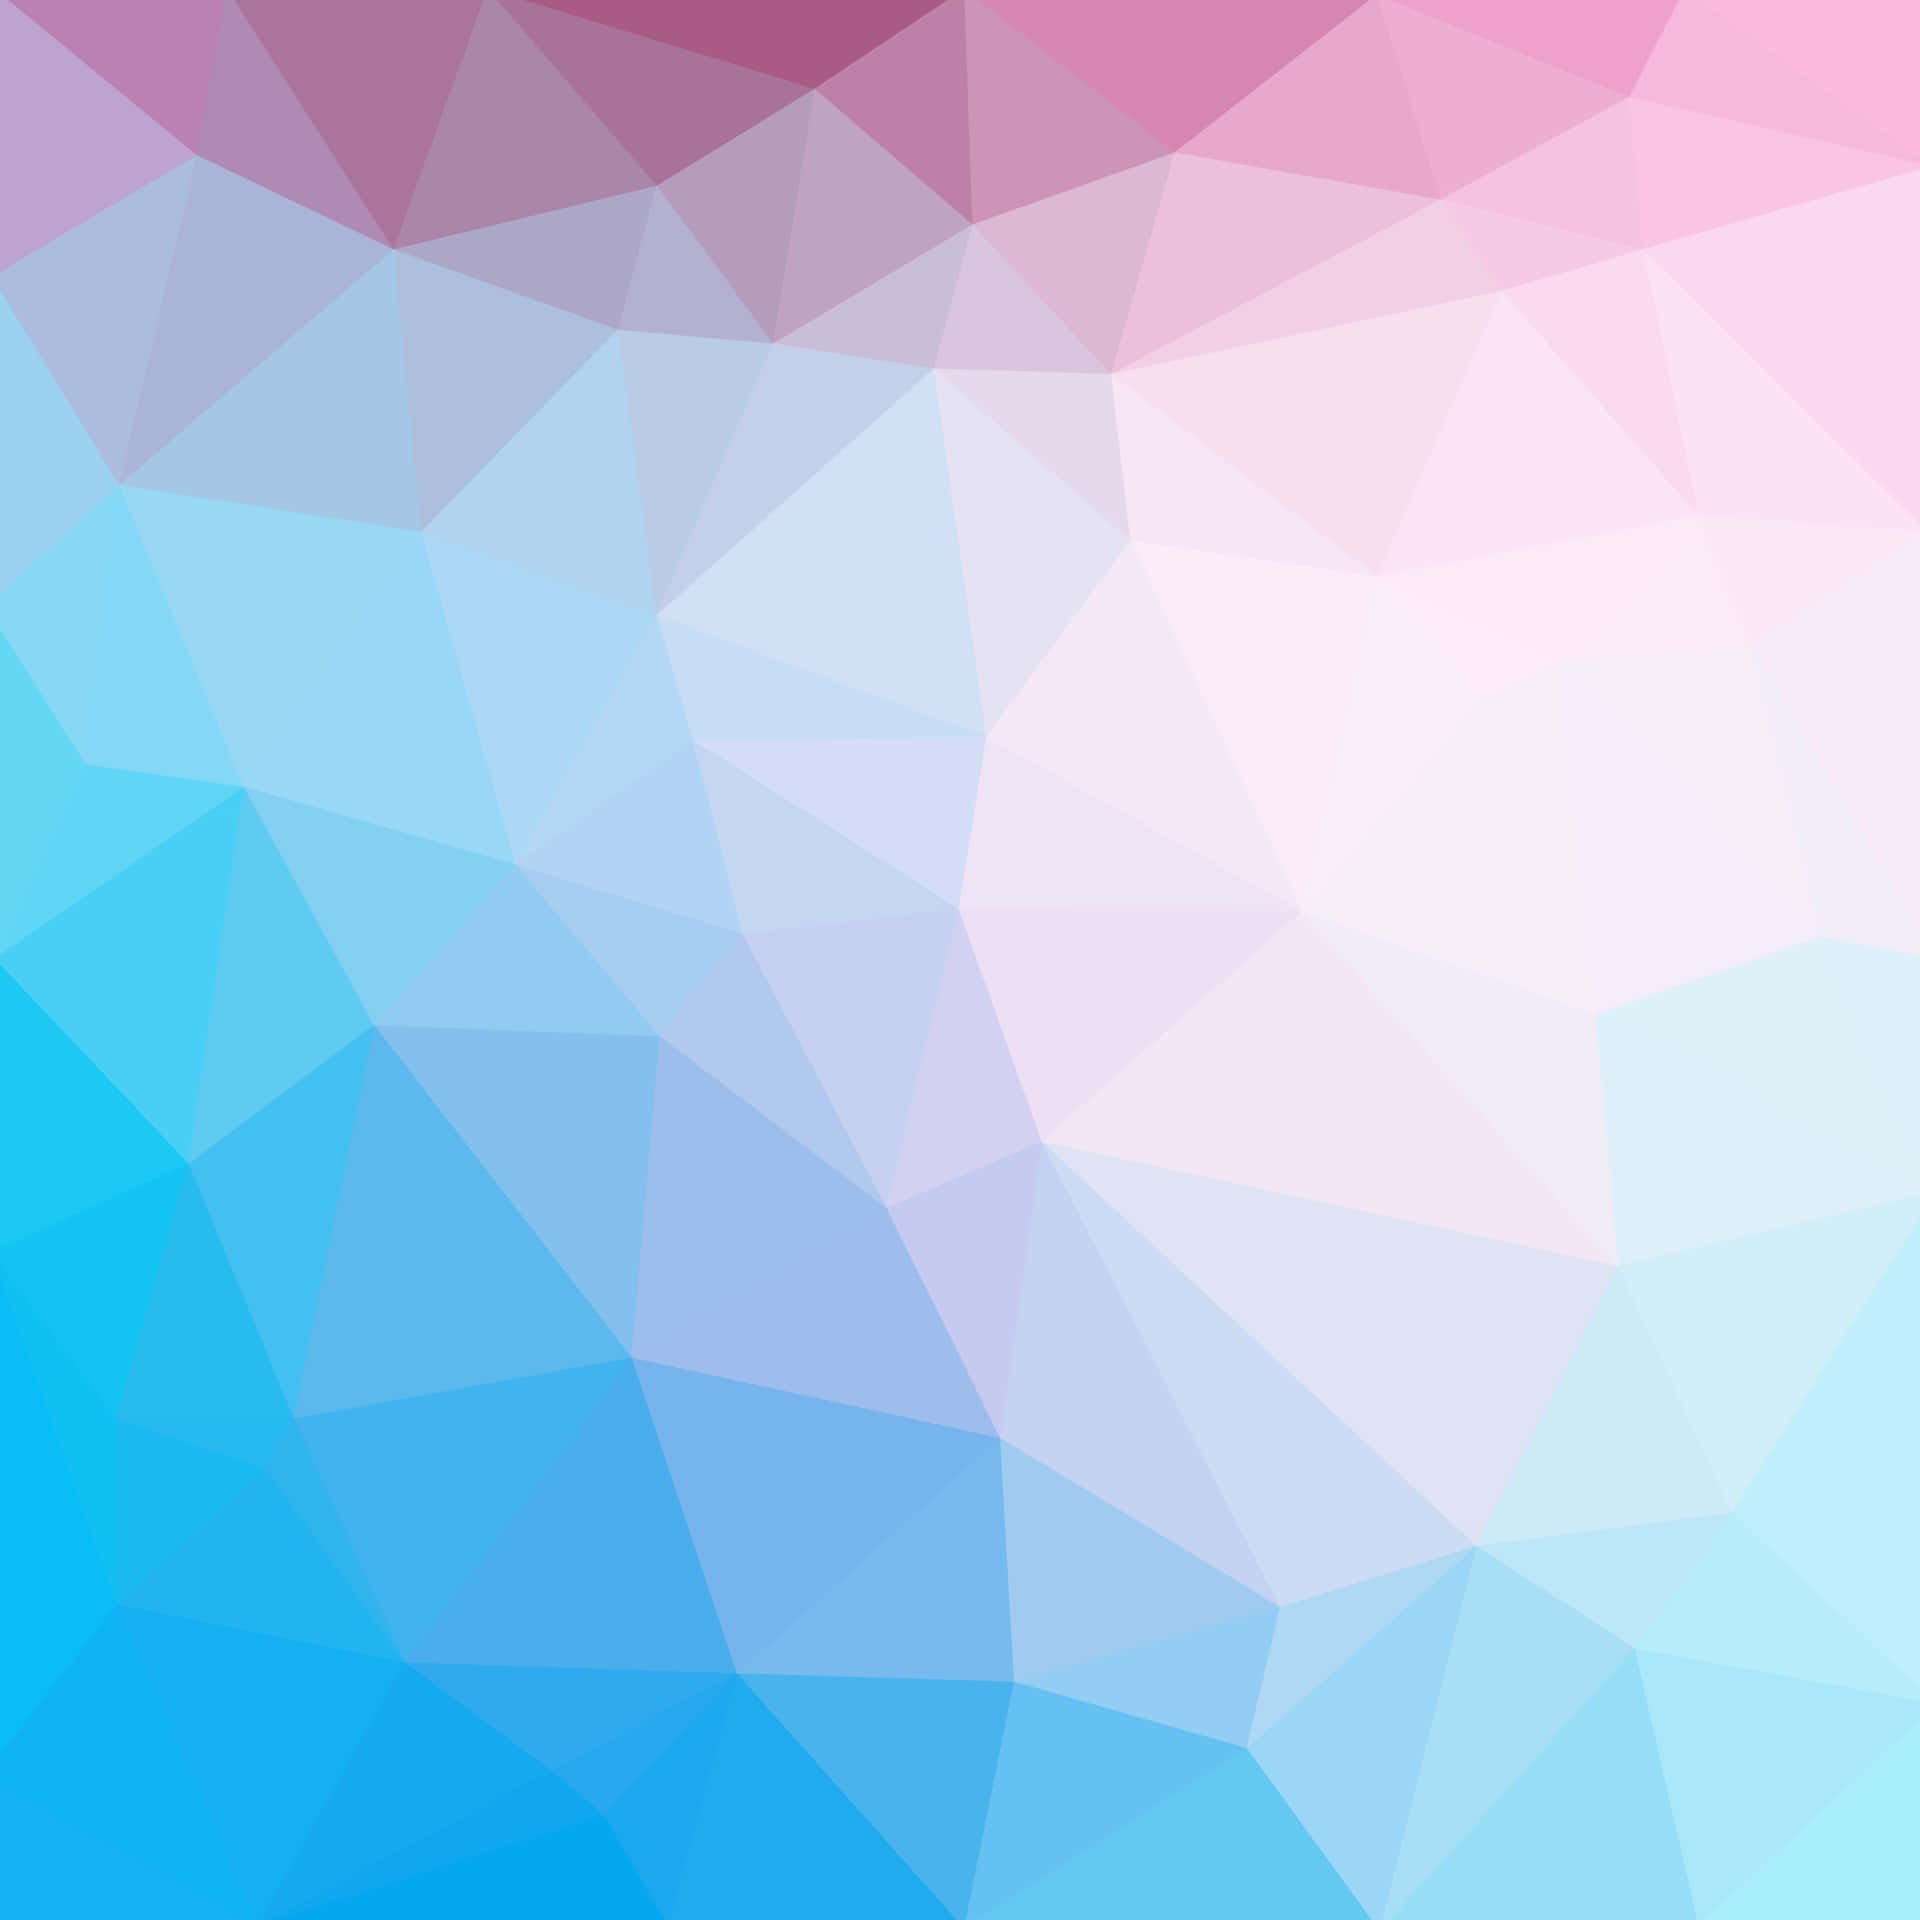 Cool Light Blue With Shapes Wallpaper